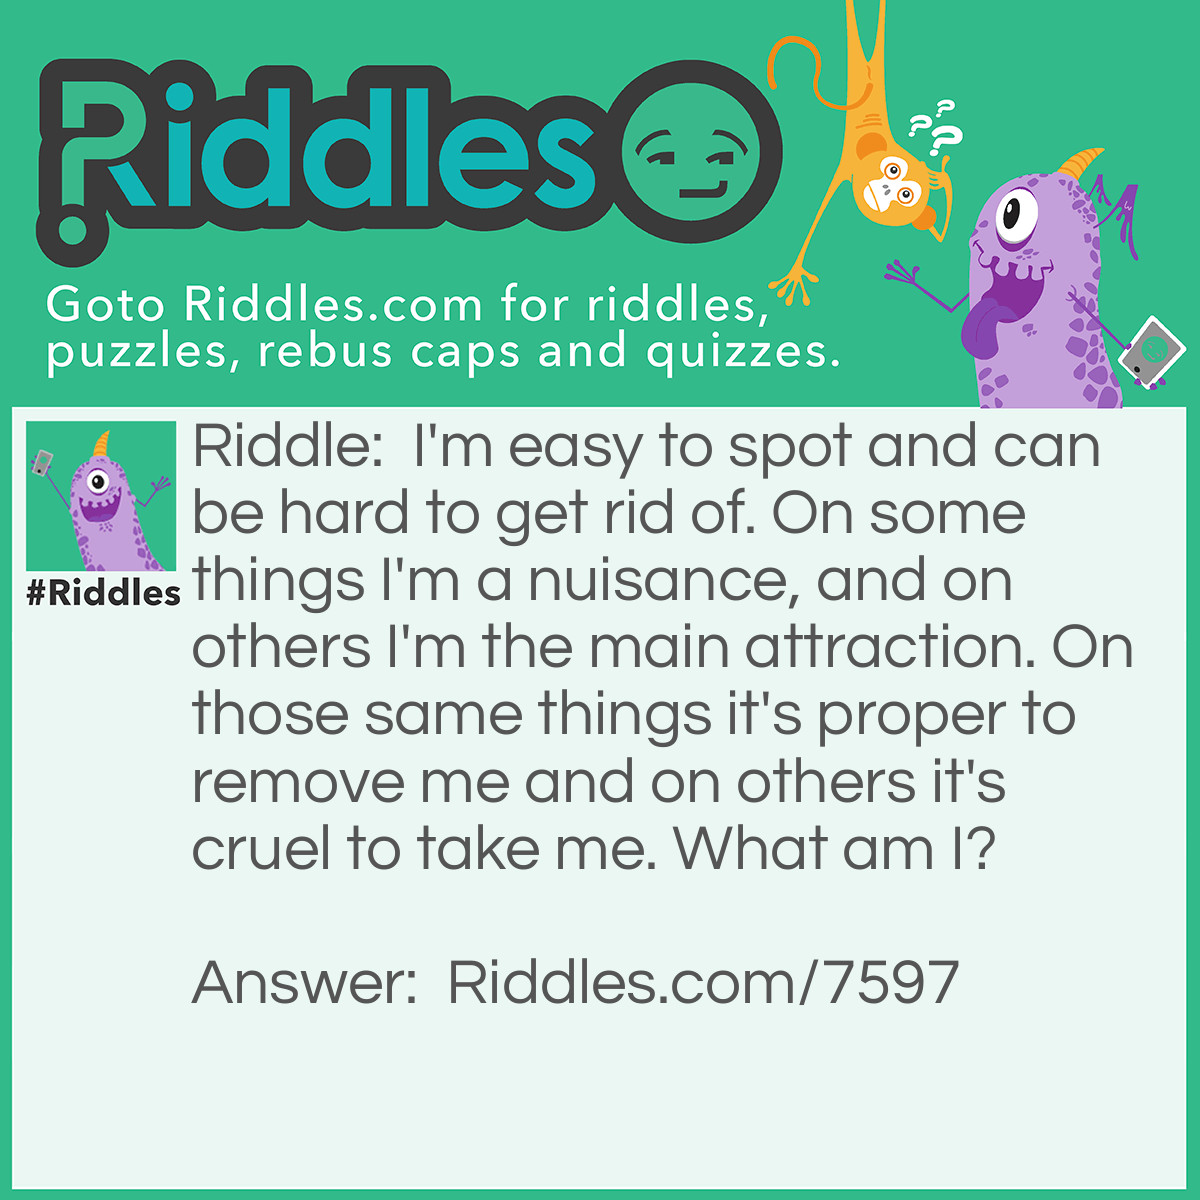 Riddle: I'm easy to spot and can be hard to get rid of. On some things I'm a nuisance, and on others I'm the main attraction. On those same things it's proper to remove me and on others it's cruel to take me. What am I? Answer: A Spot.